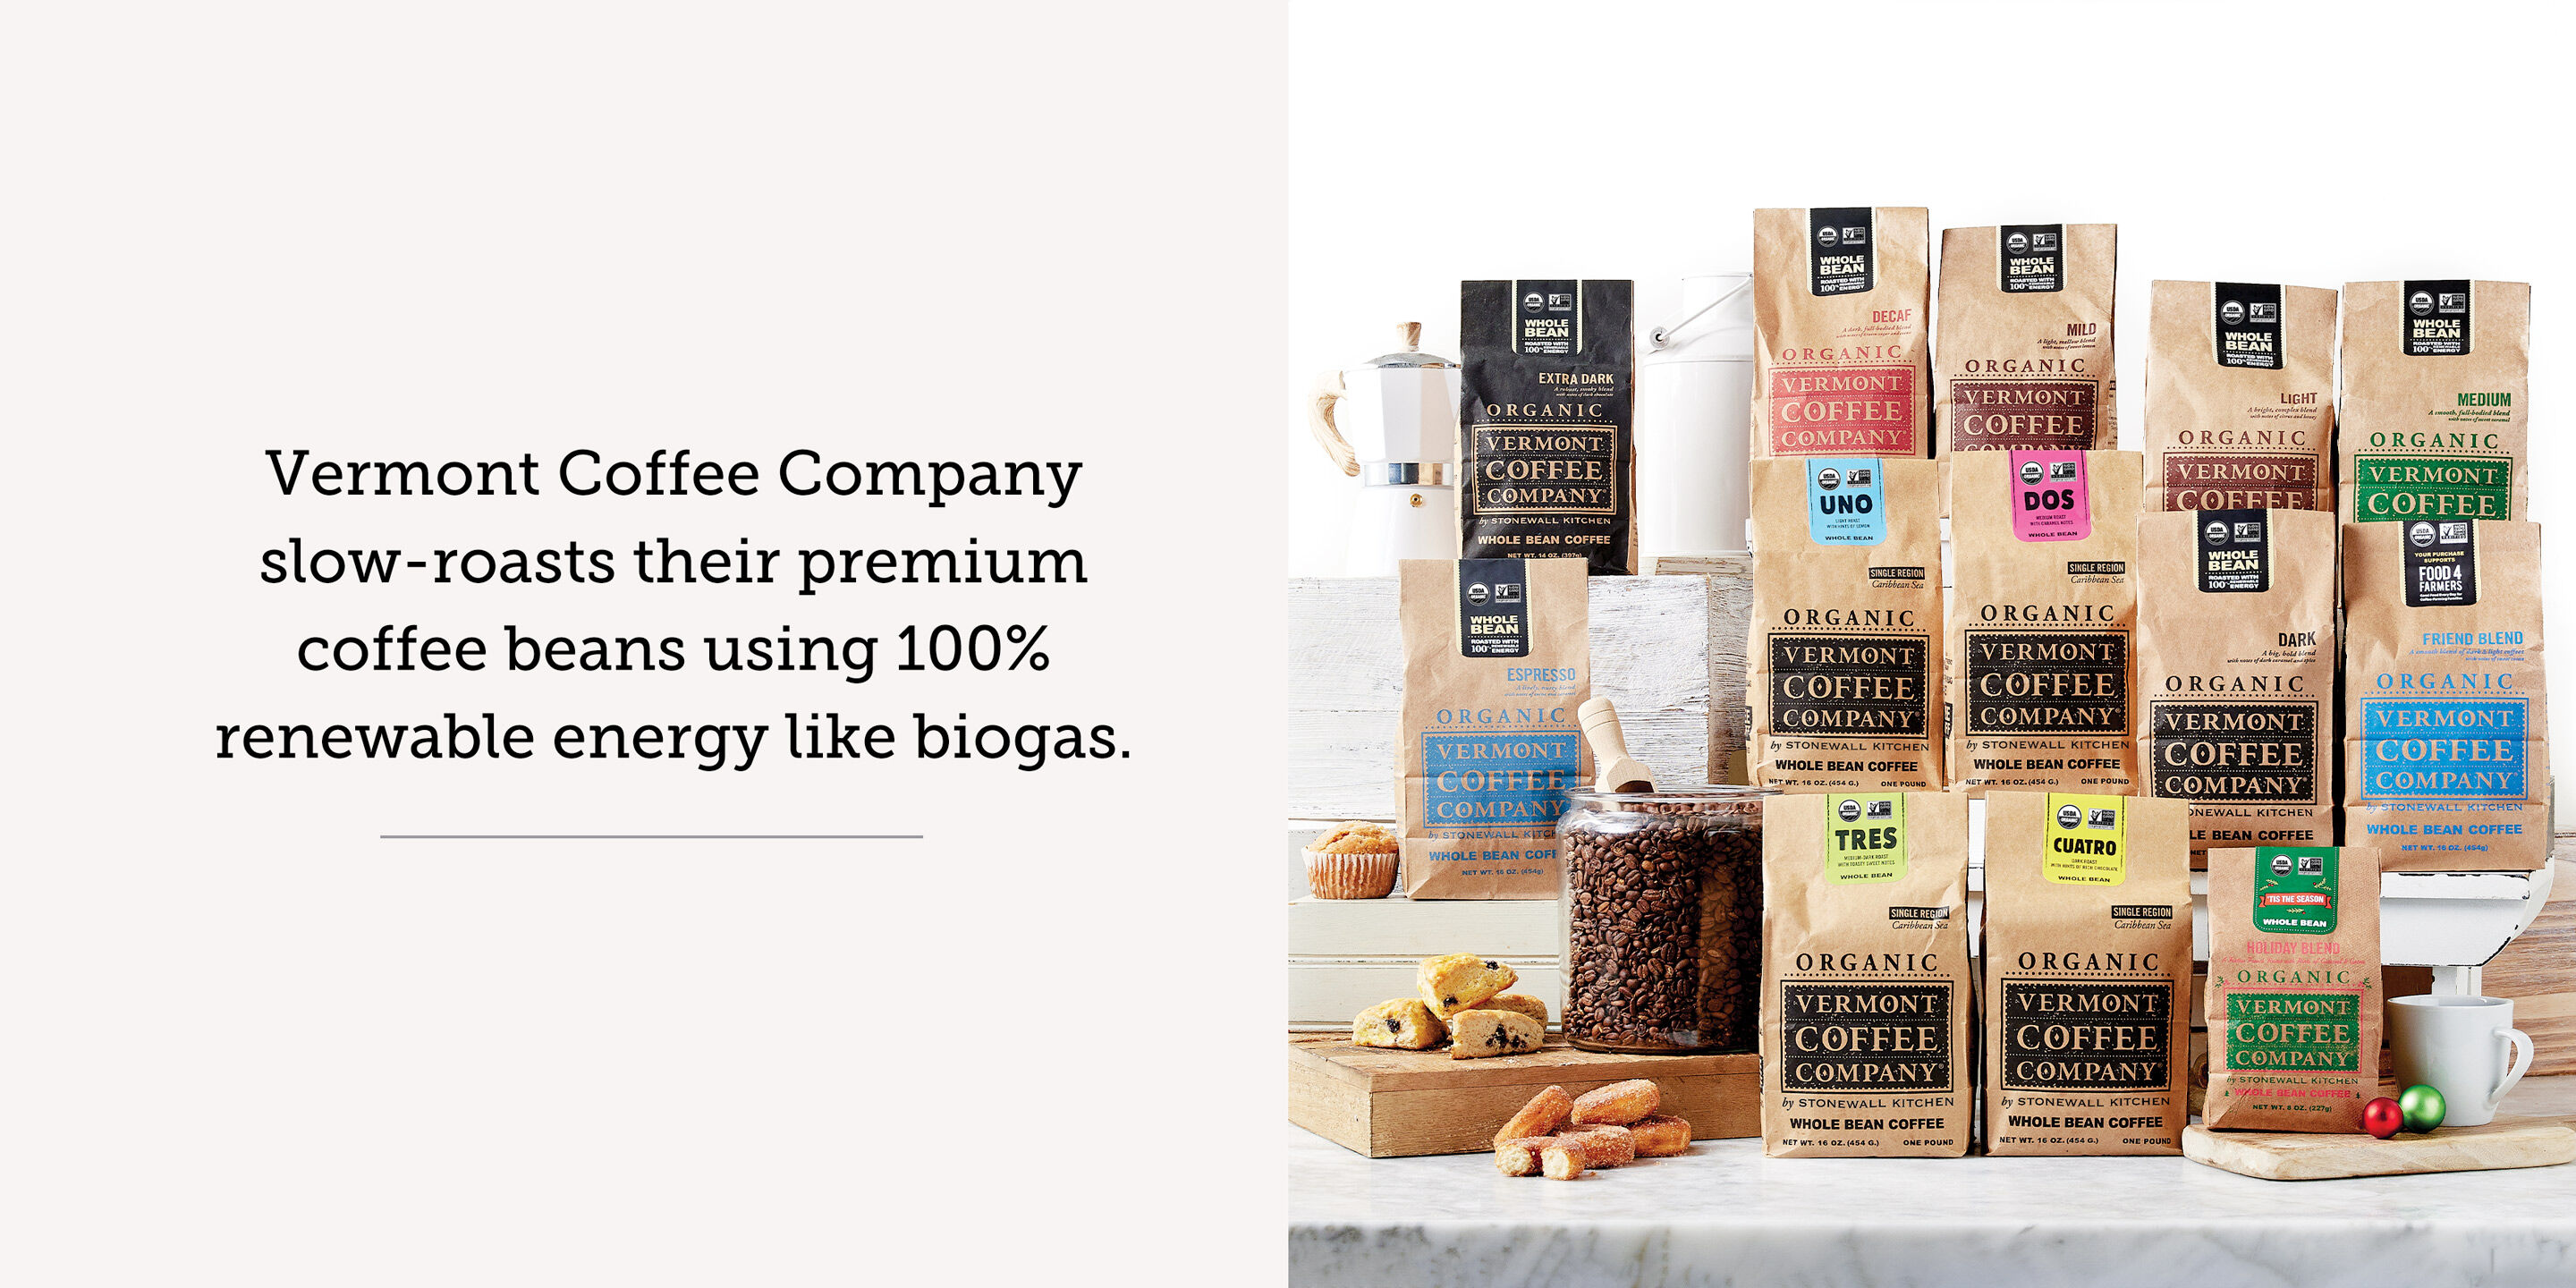 Vermont Coffee Company slow-roasts their premium coffee beans by using 100% renewable energy like biogas.